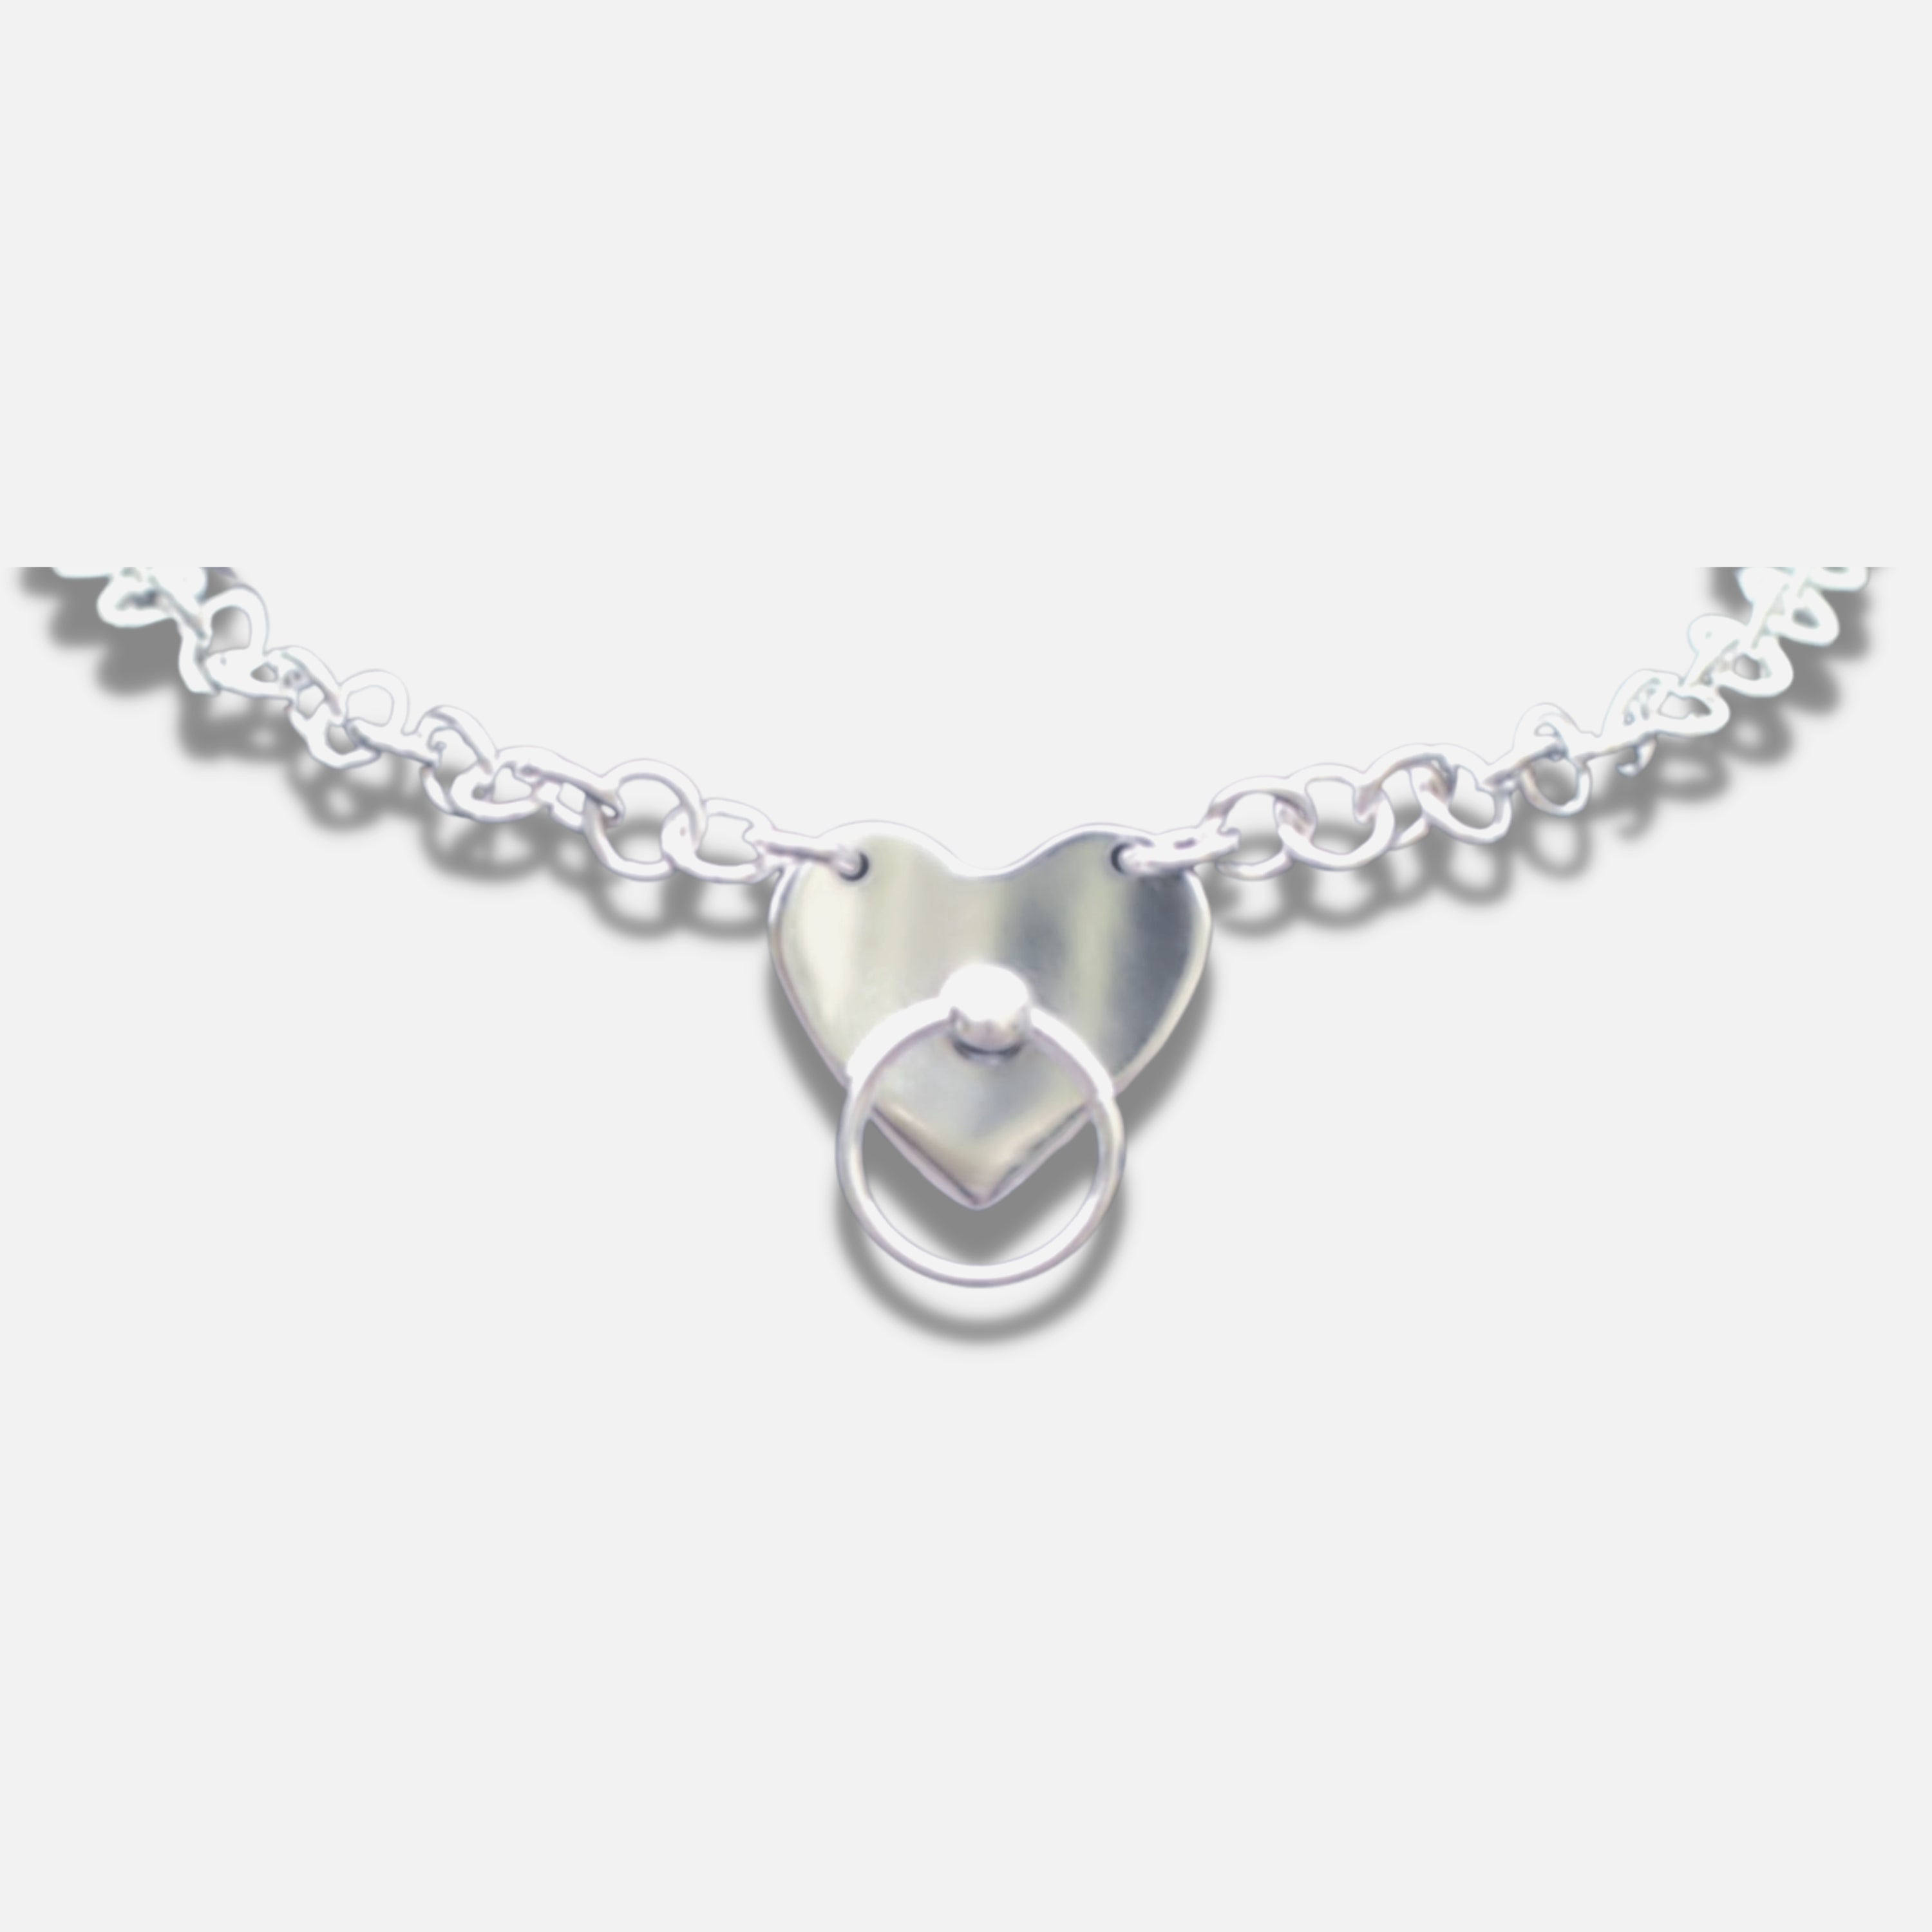 The Captive Heart Collar-Sterling Silver 30mm Heavy Chain and O Ring.